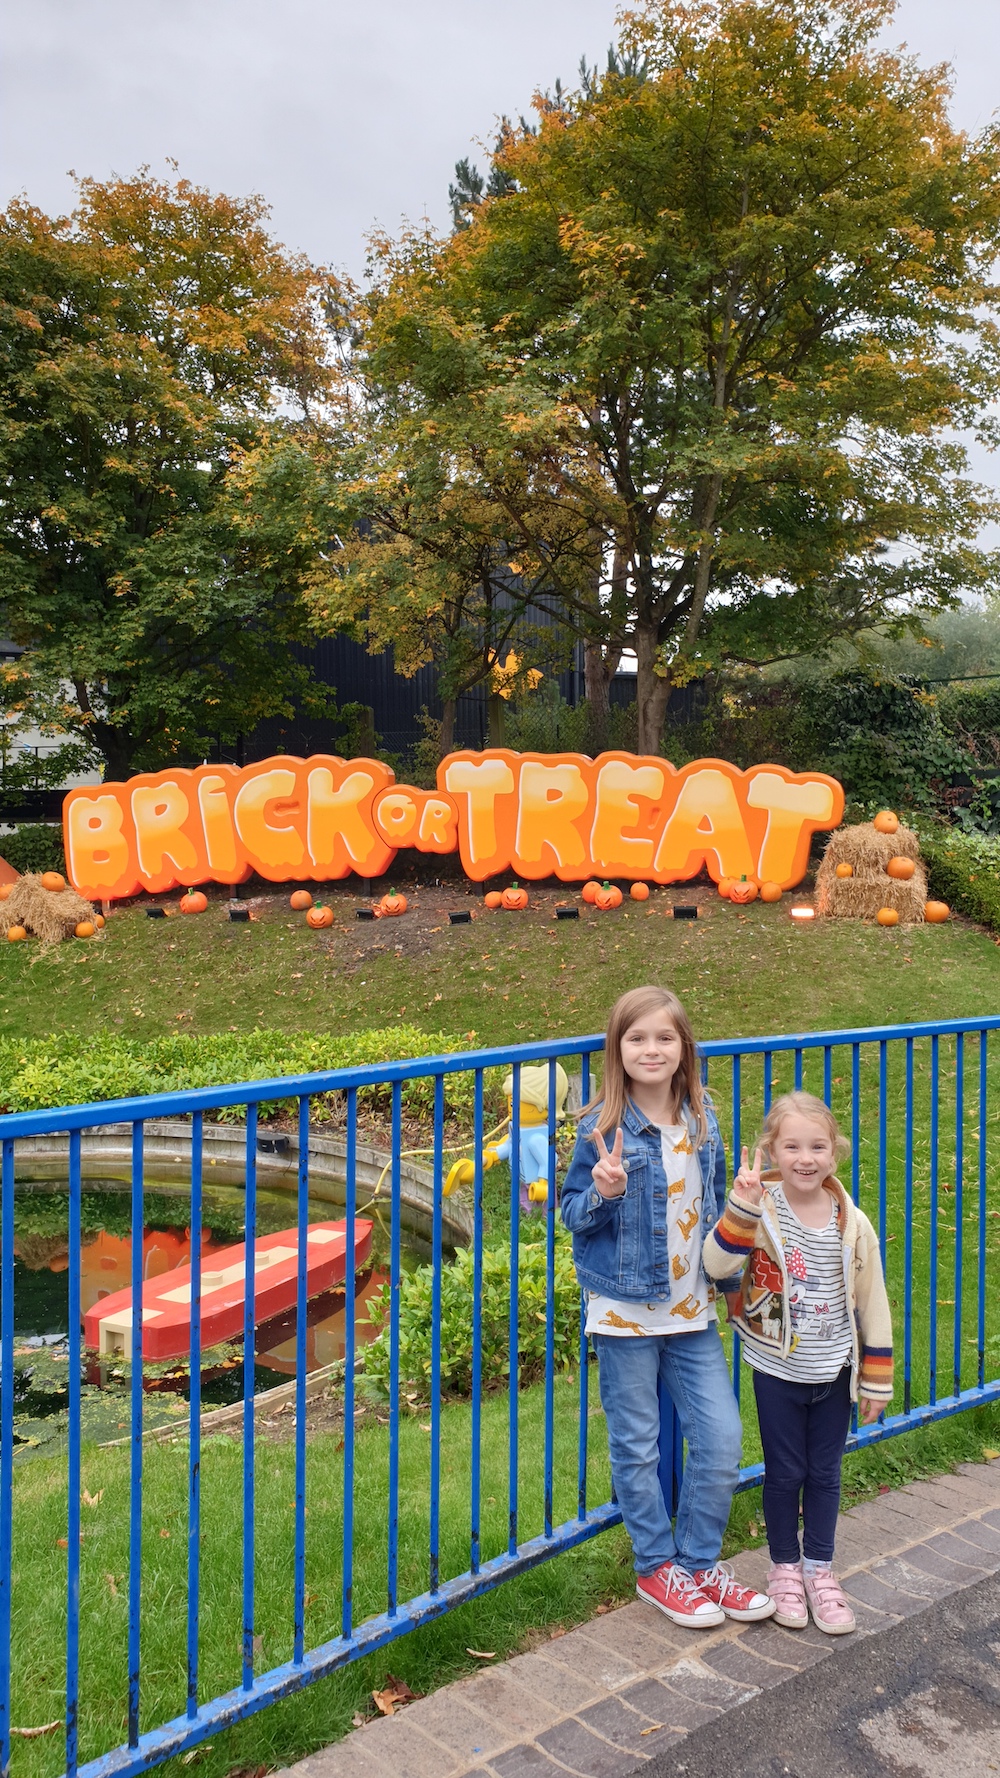 legoland brick or treat sign with kids in front